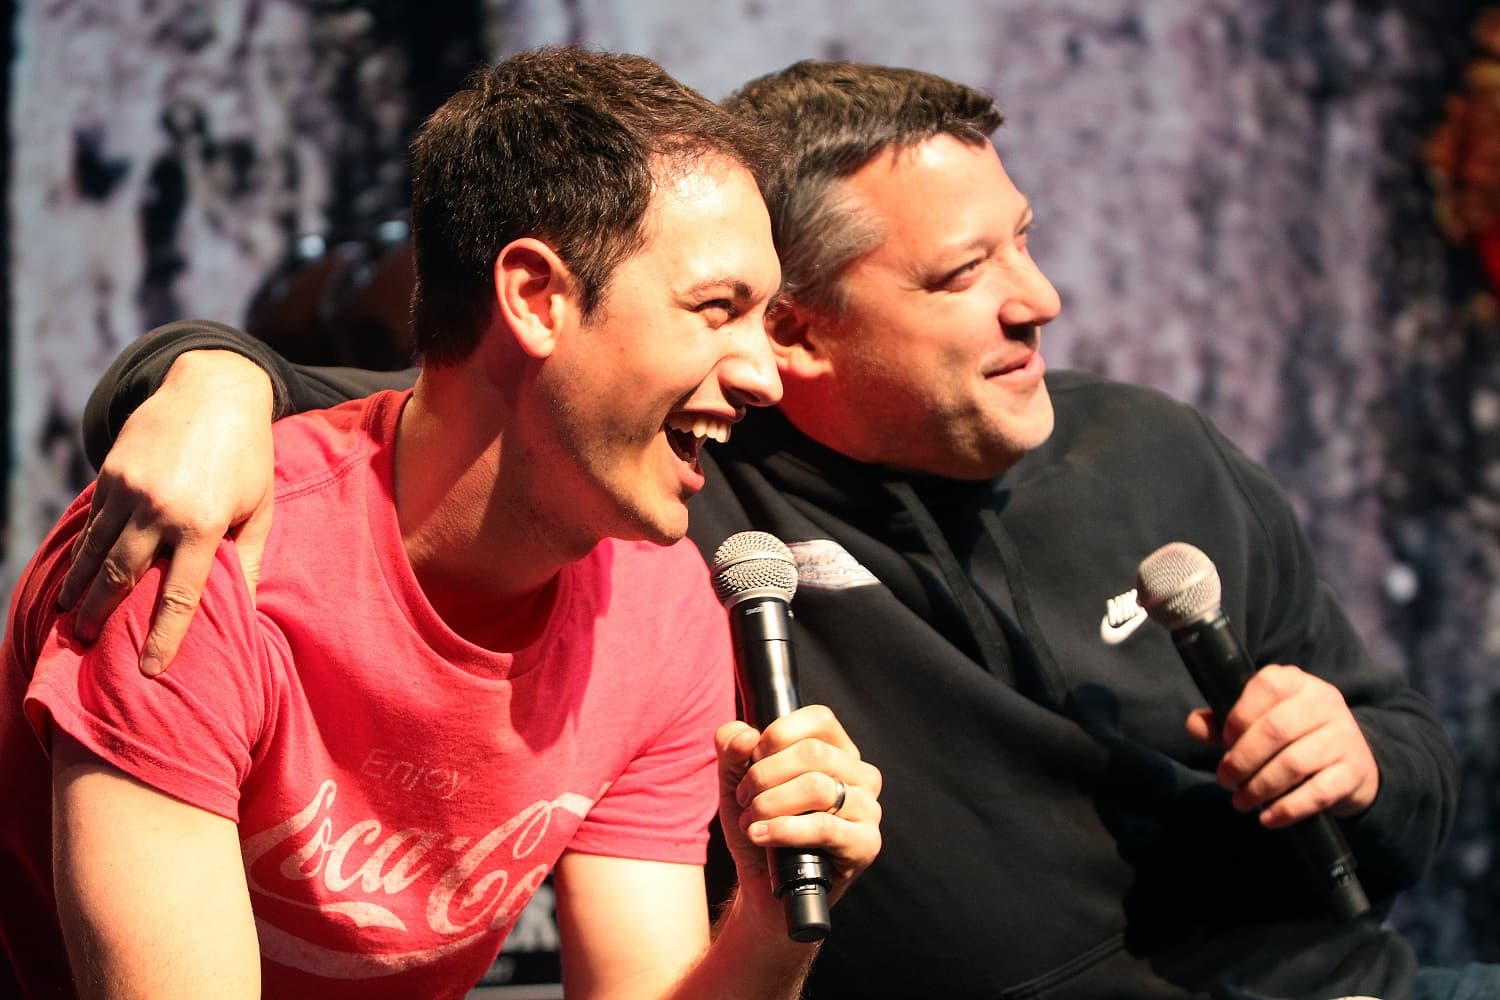 Joey Logano laughs on stage with former NASCAR driver Tony Stewart, during the Texas Motor Speedway FANDAGO event on April 6, 2017. | Chris Graythen/Getty Images for Texas Motor Speedway